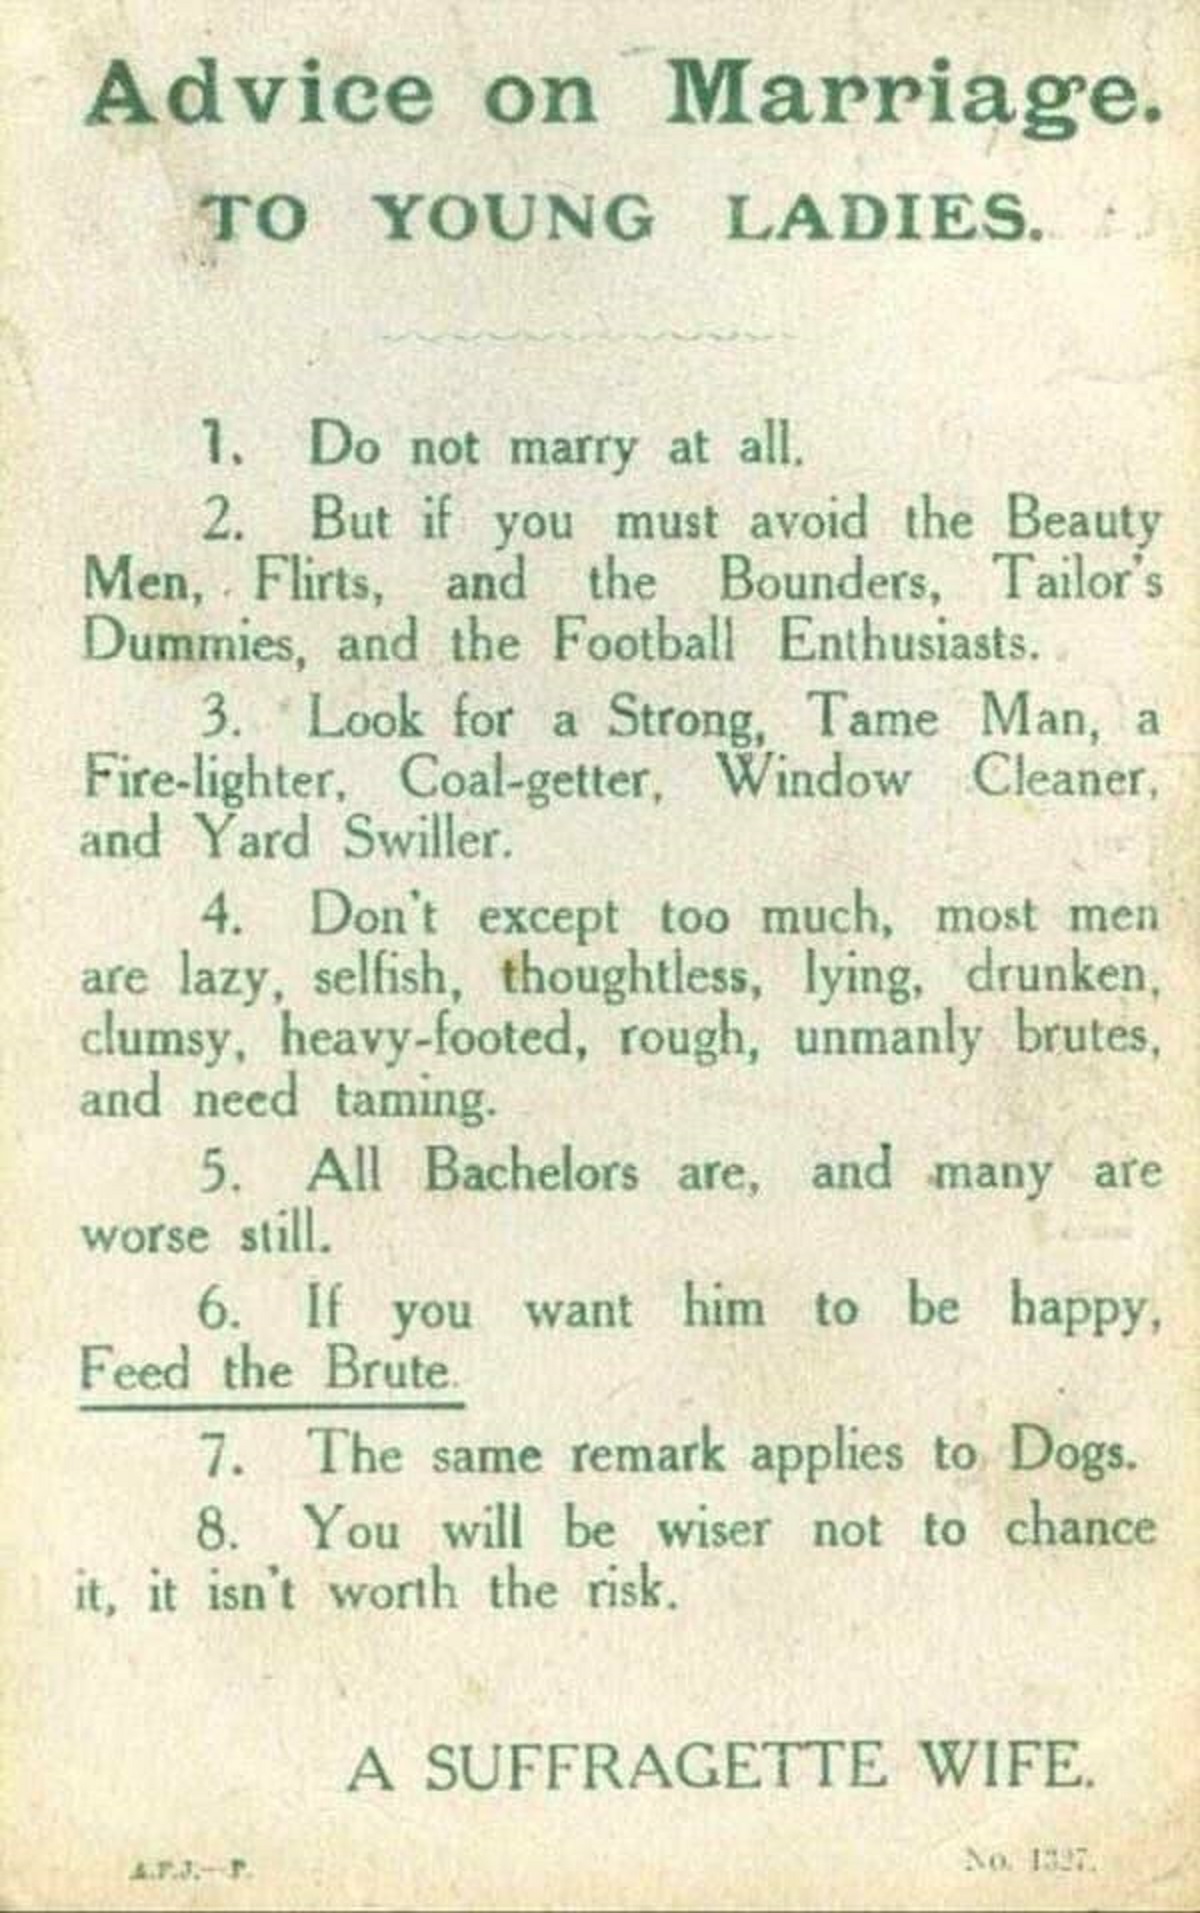 fascinating photos - advice on marriage to young ladies suffragette - Advice on Marriage. To Young Ladies. 1. Do not marry at all. 2. But if you must avoid the Beauty Men, Flirts, and the Bounders, Tailor's Dummies, and the Football Enthusiasts. 3. Look f